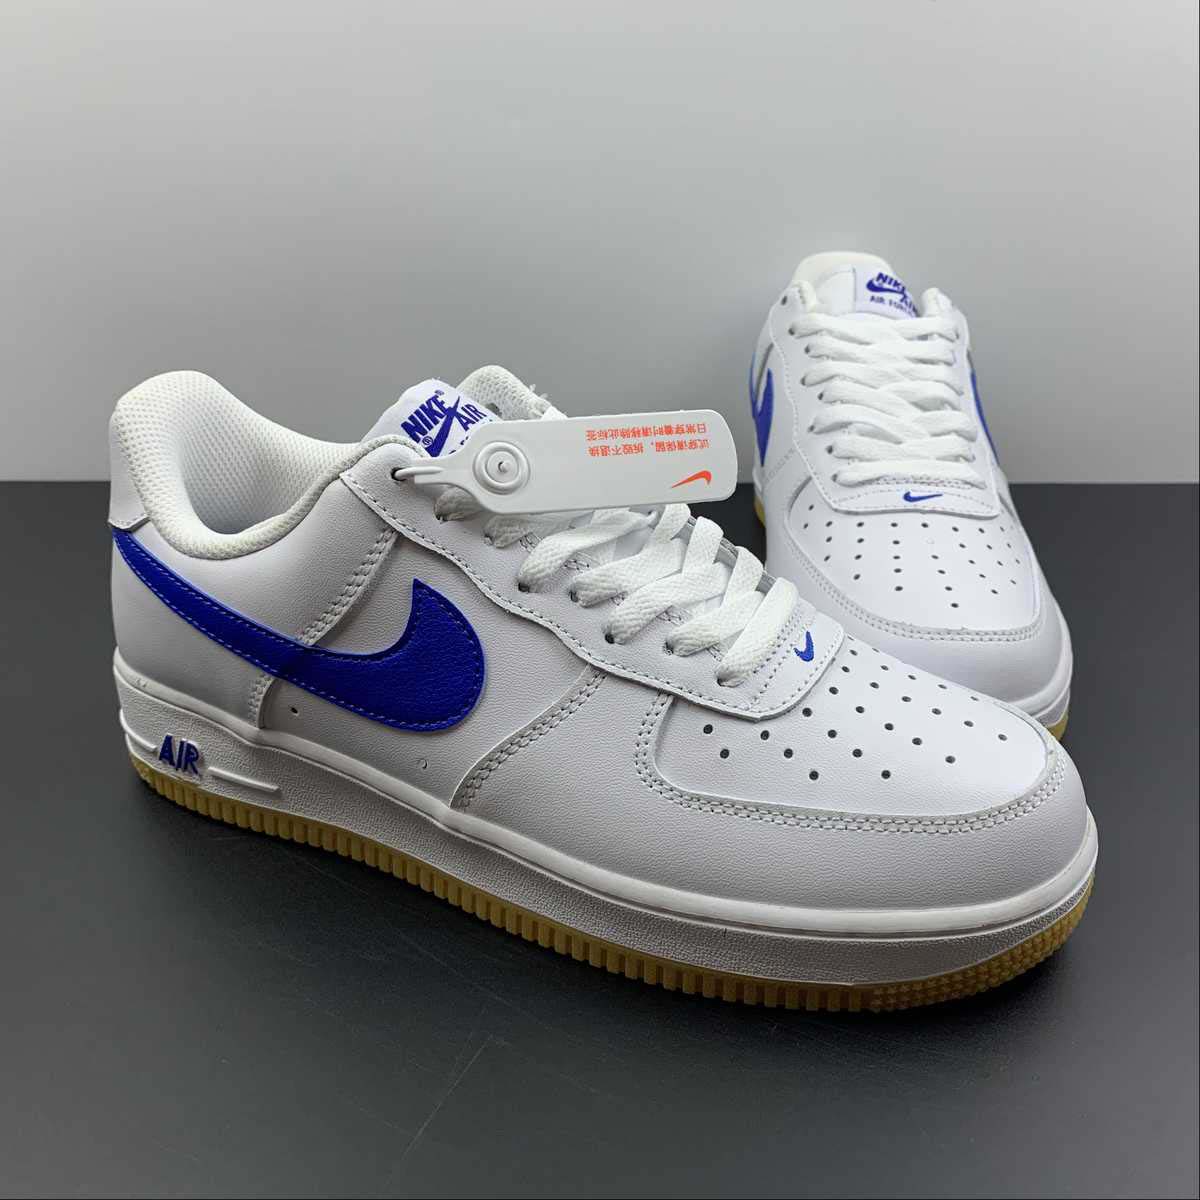 absceso Mentalidad Toro Nike Air Force 1 Low Sunce 1982 VQFGQ7 — TrapXShop